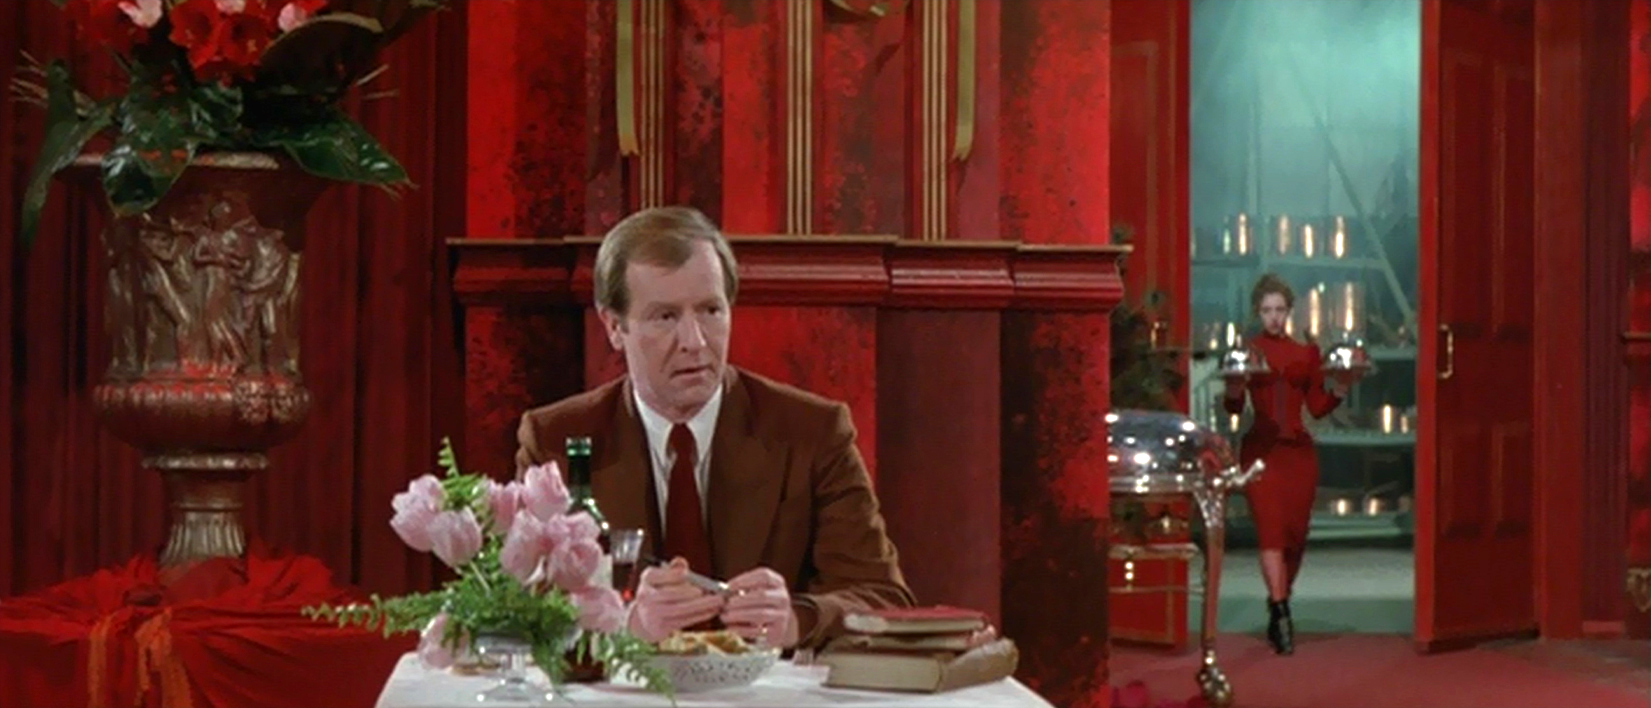 The Cook the Thief His Wife and Her Lover - Peter Greenaway - Alan Howard - Michael table - dining room - Le Hollandais restaurant